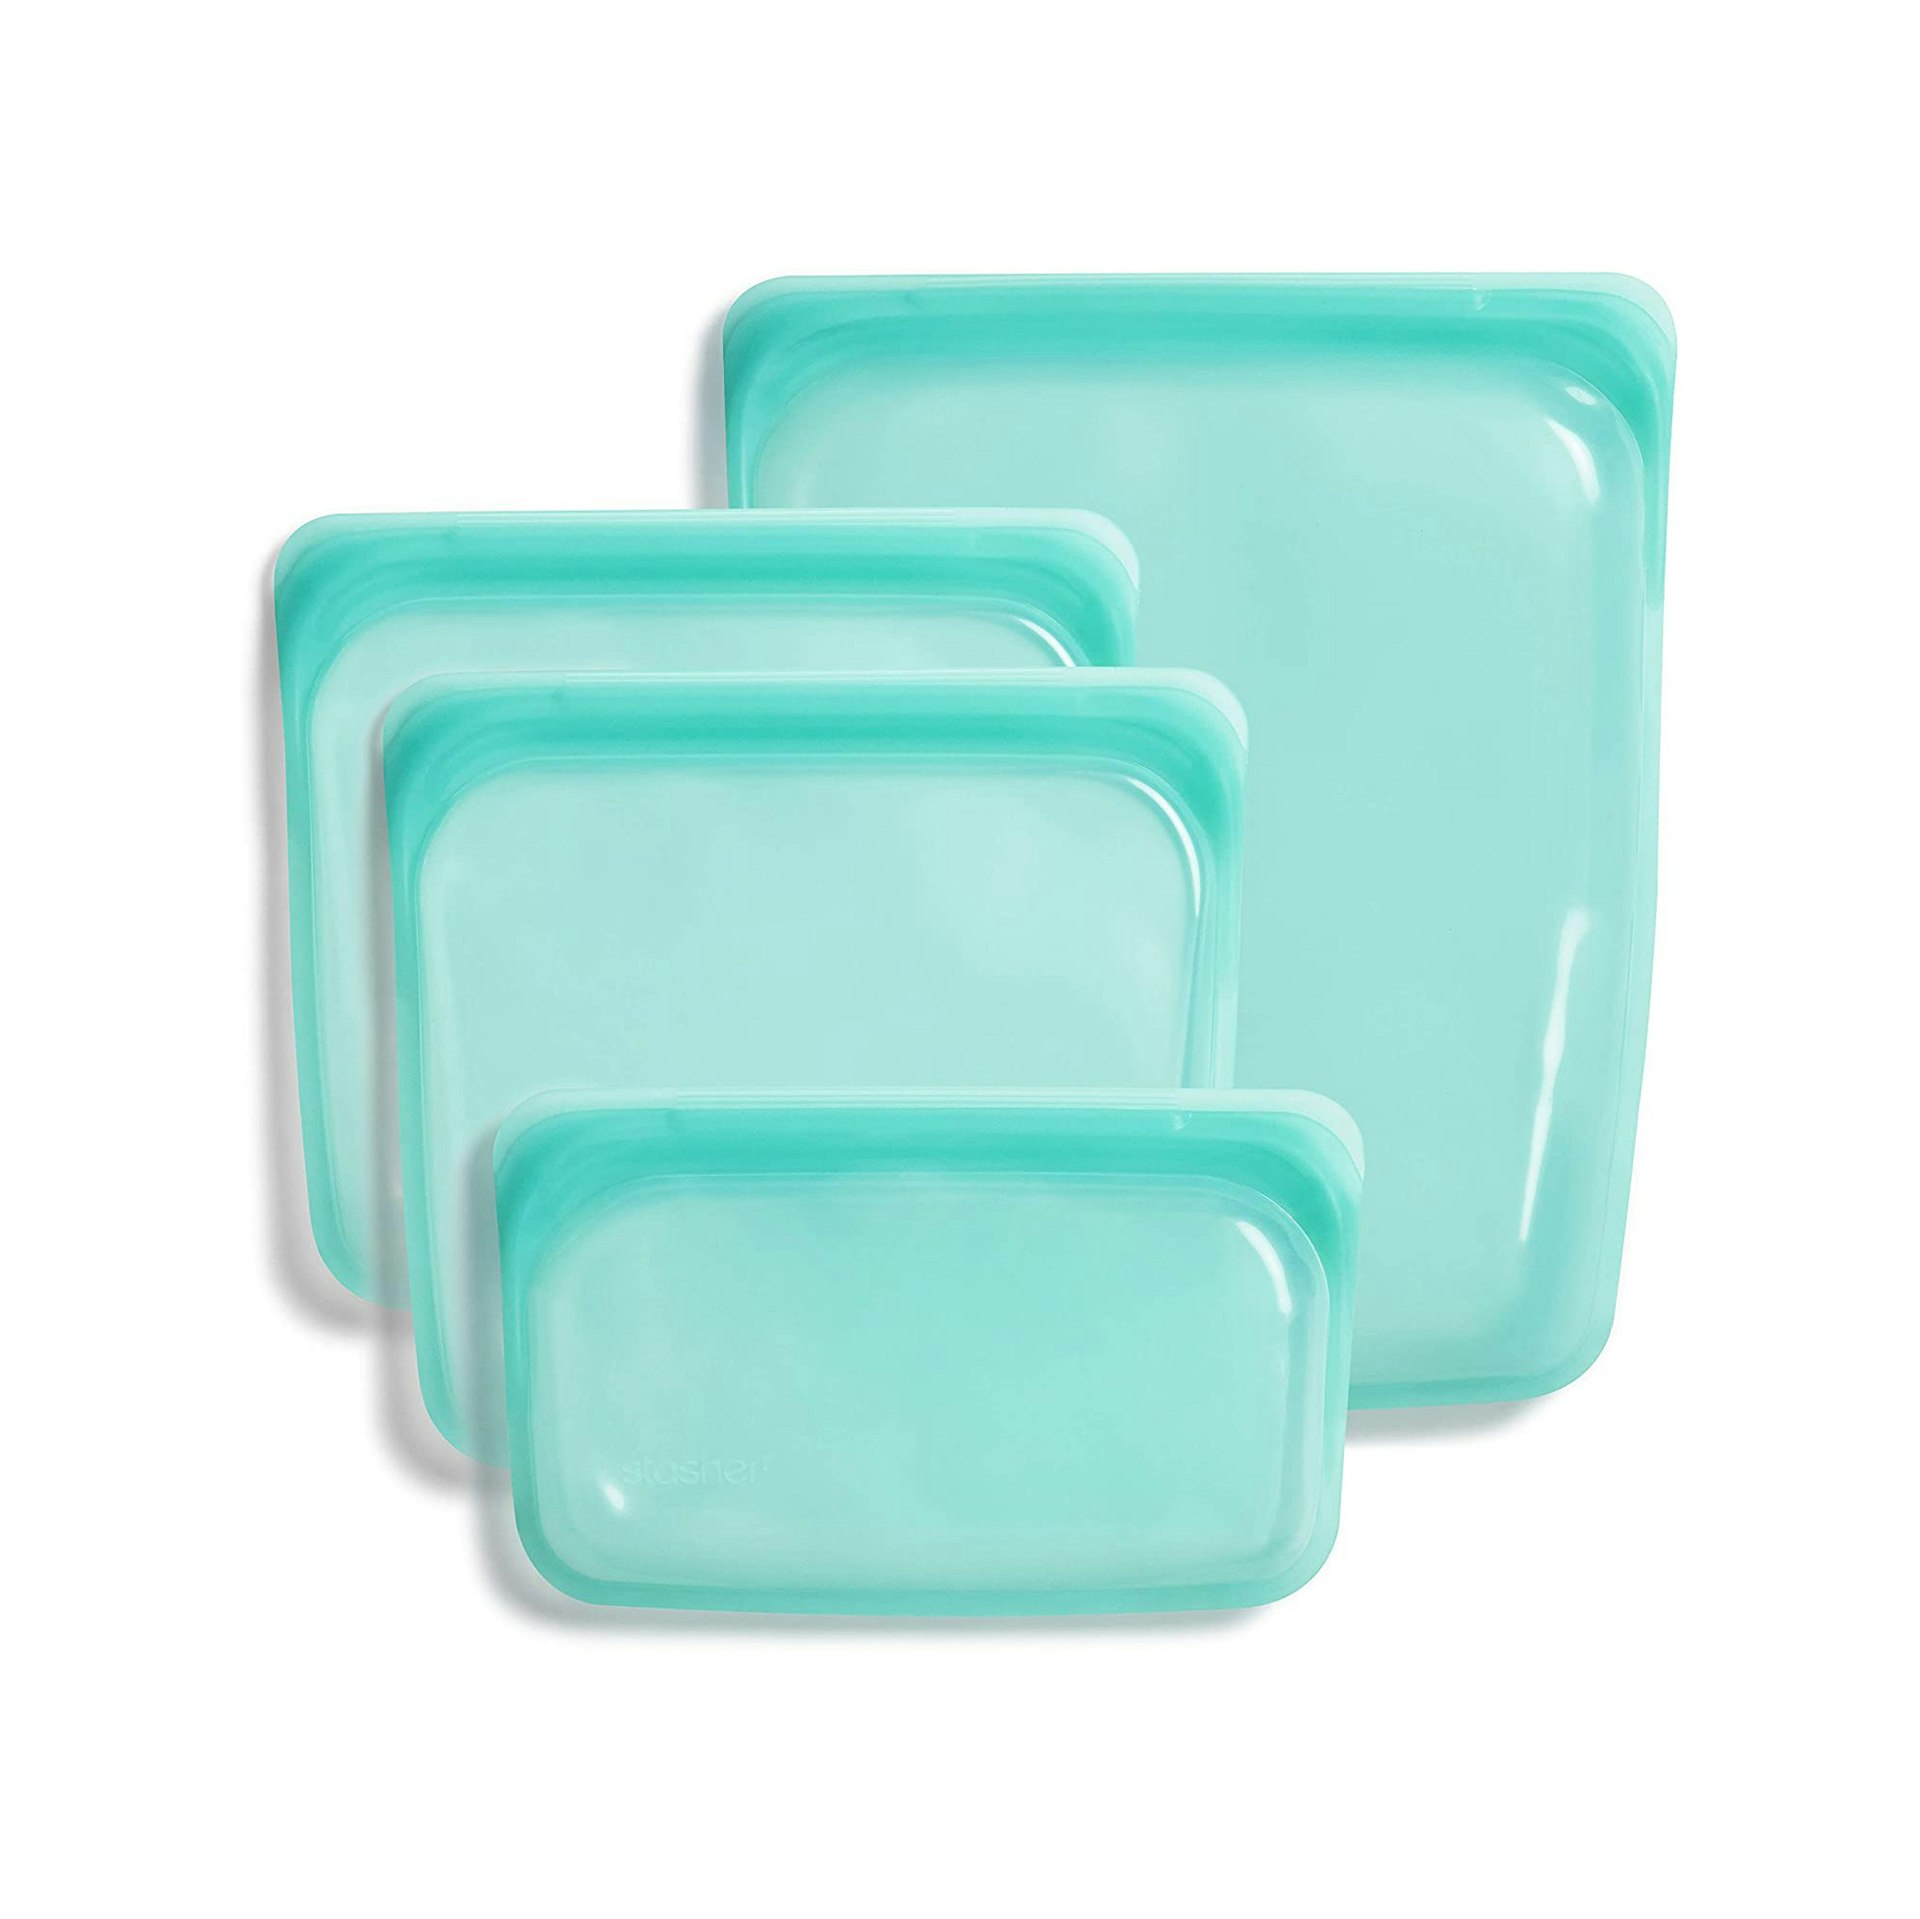 Stasher's platinum silicone food-grade reusable storage bag in mint green